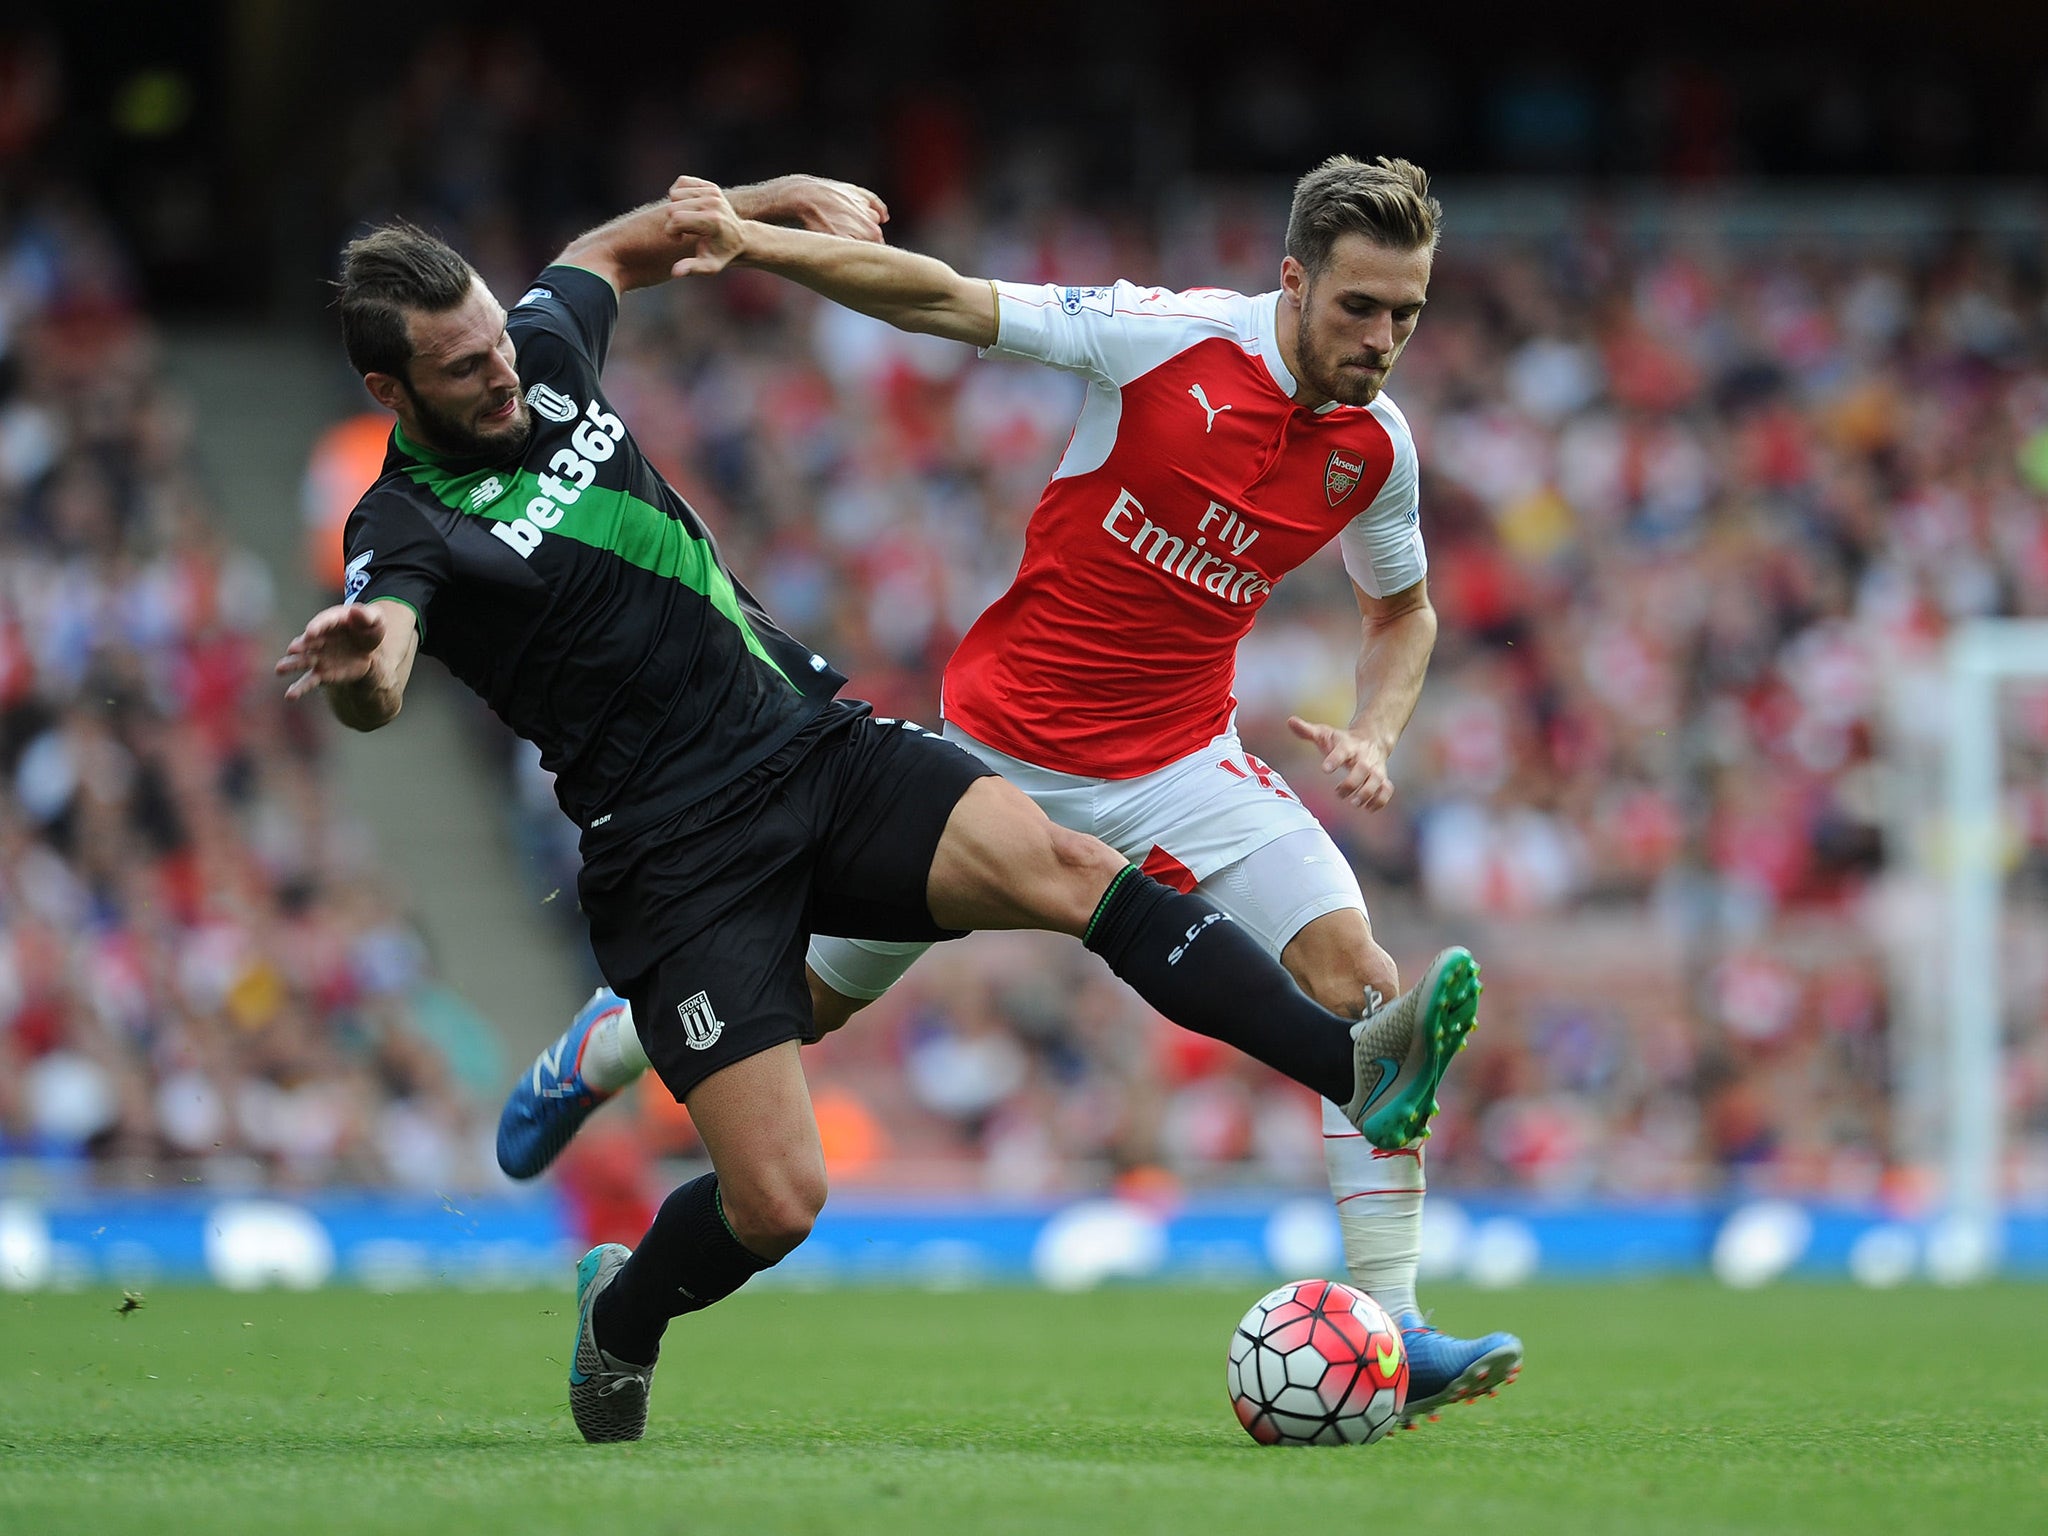 Pieters competes for the ball with Ramsey during last season's corresponding fixture